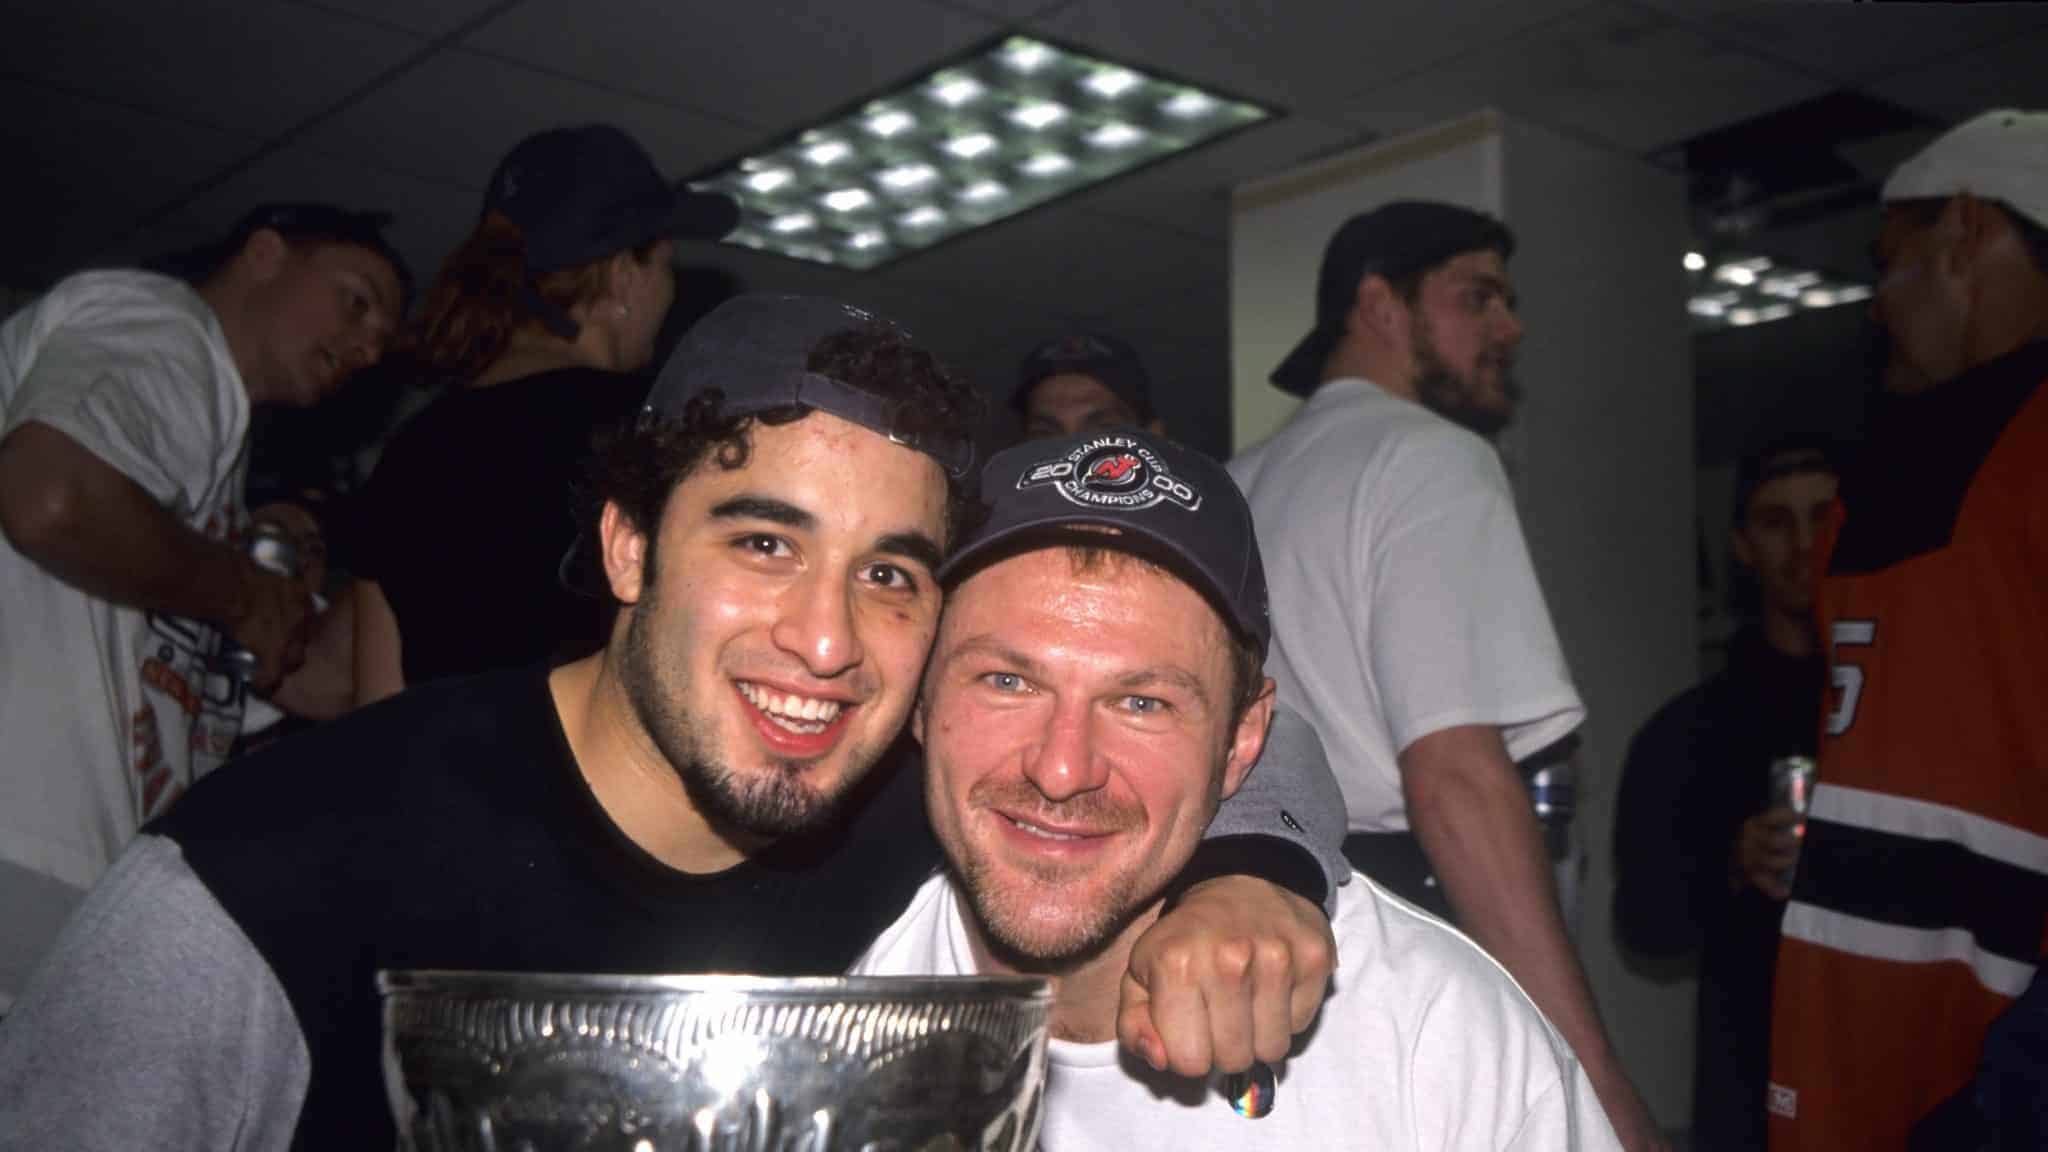 DALLAS - JUNE 10: Claude Lemieux #22 of the New Jersey Devils and Scott Gomez celebrate with the Stanley Cup Trophy after winning the 2000 Stanley Cup Finals game against the Dallas Stars at Reunion Arena on June 10, 2000 in Dallas, Texas.